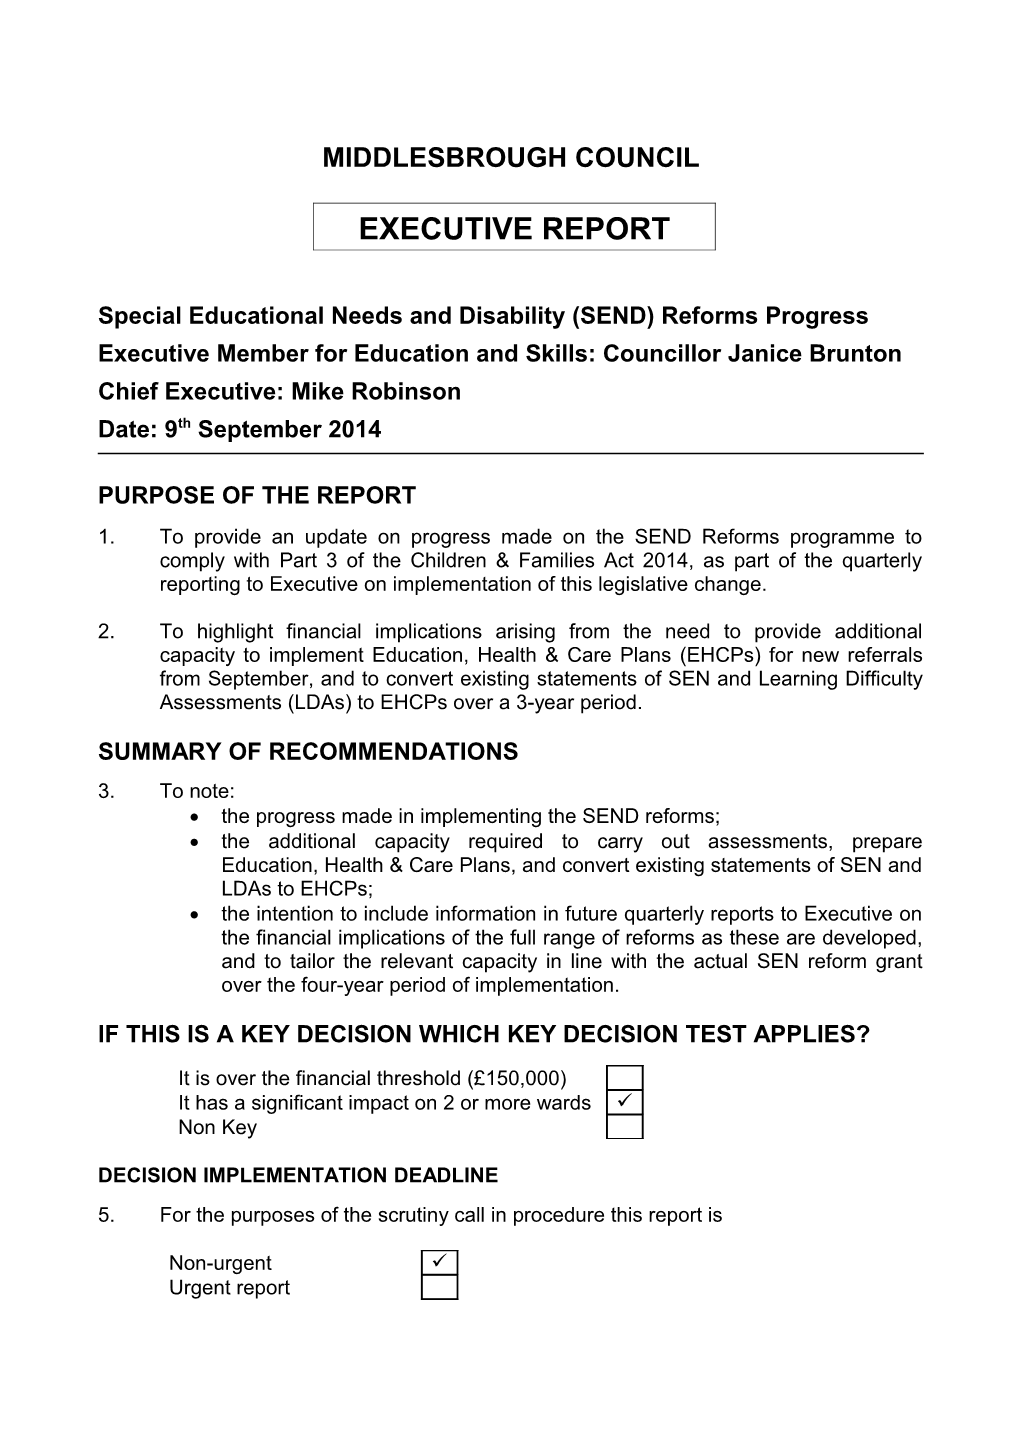 Special Educational Needs and Disability (SEND) Reforms Progress